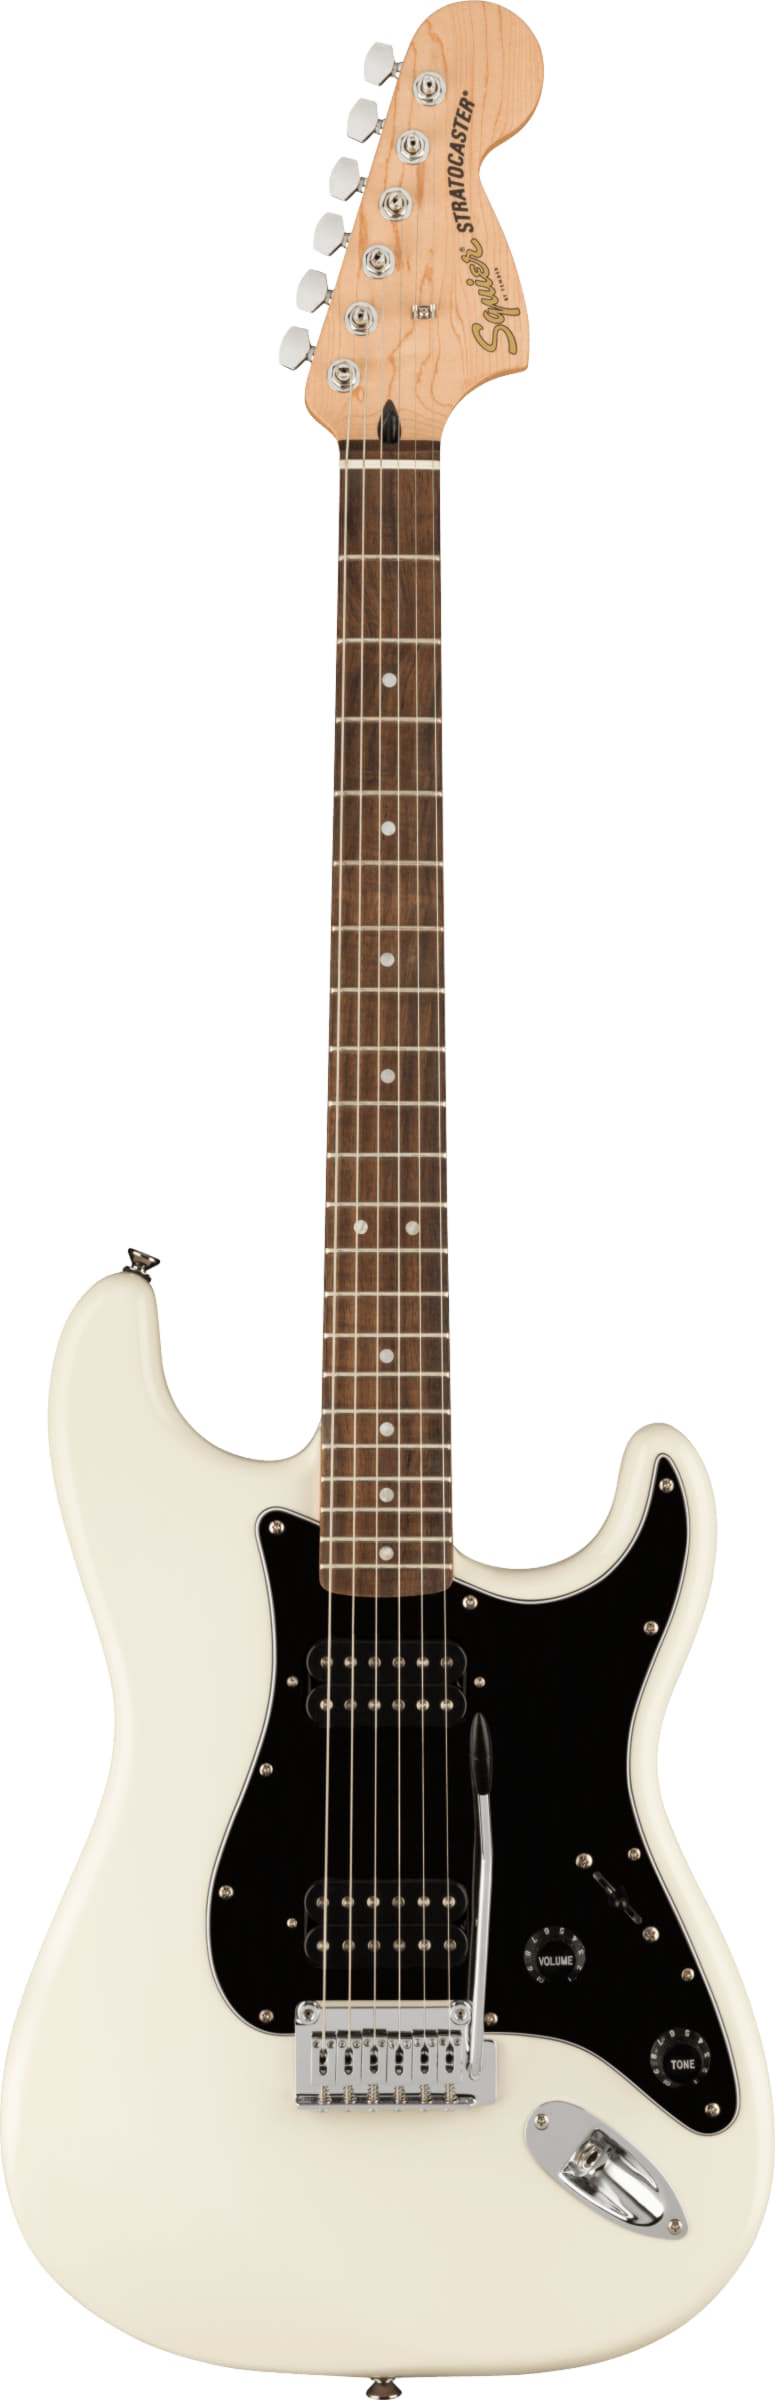 Электрогитары FENDER SQUIER Affinity Stratocaster HH LRL OLW billy squier enough is enough hear